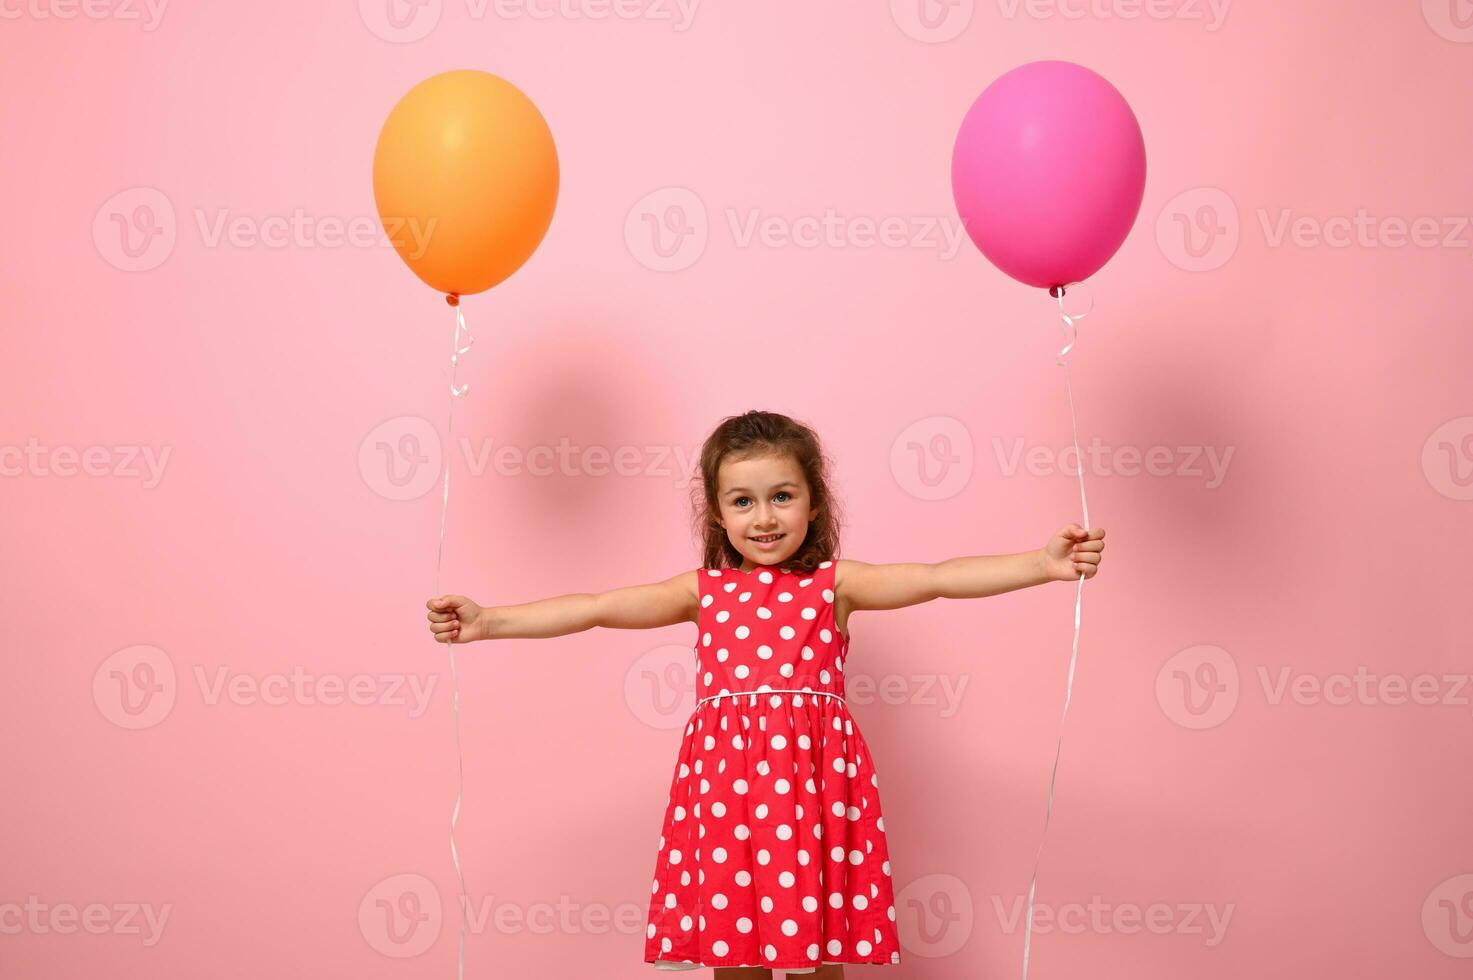 Adorable gorgeous 4 years baby girl in pink dress with white polka dots, holding colorful balloons in her outstretched hands, smiling looking at the camera, isolated on pink background with copy space photo